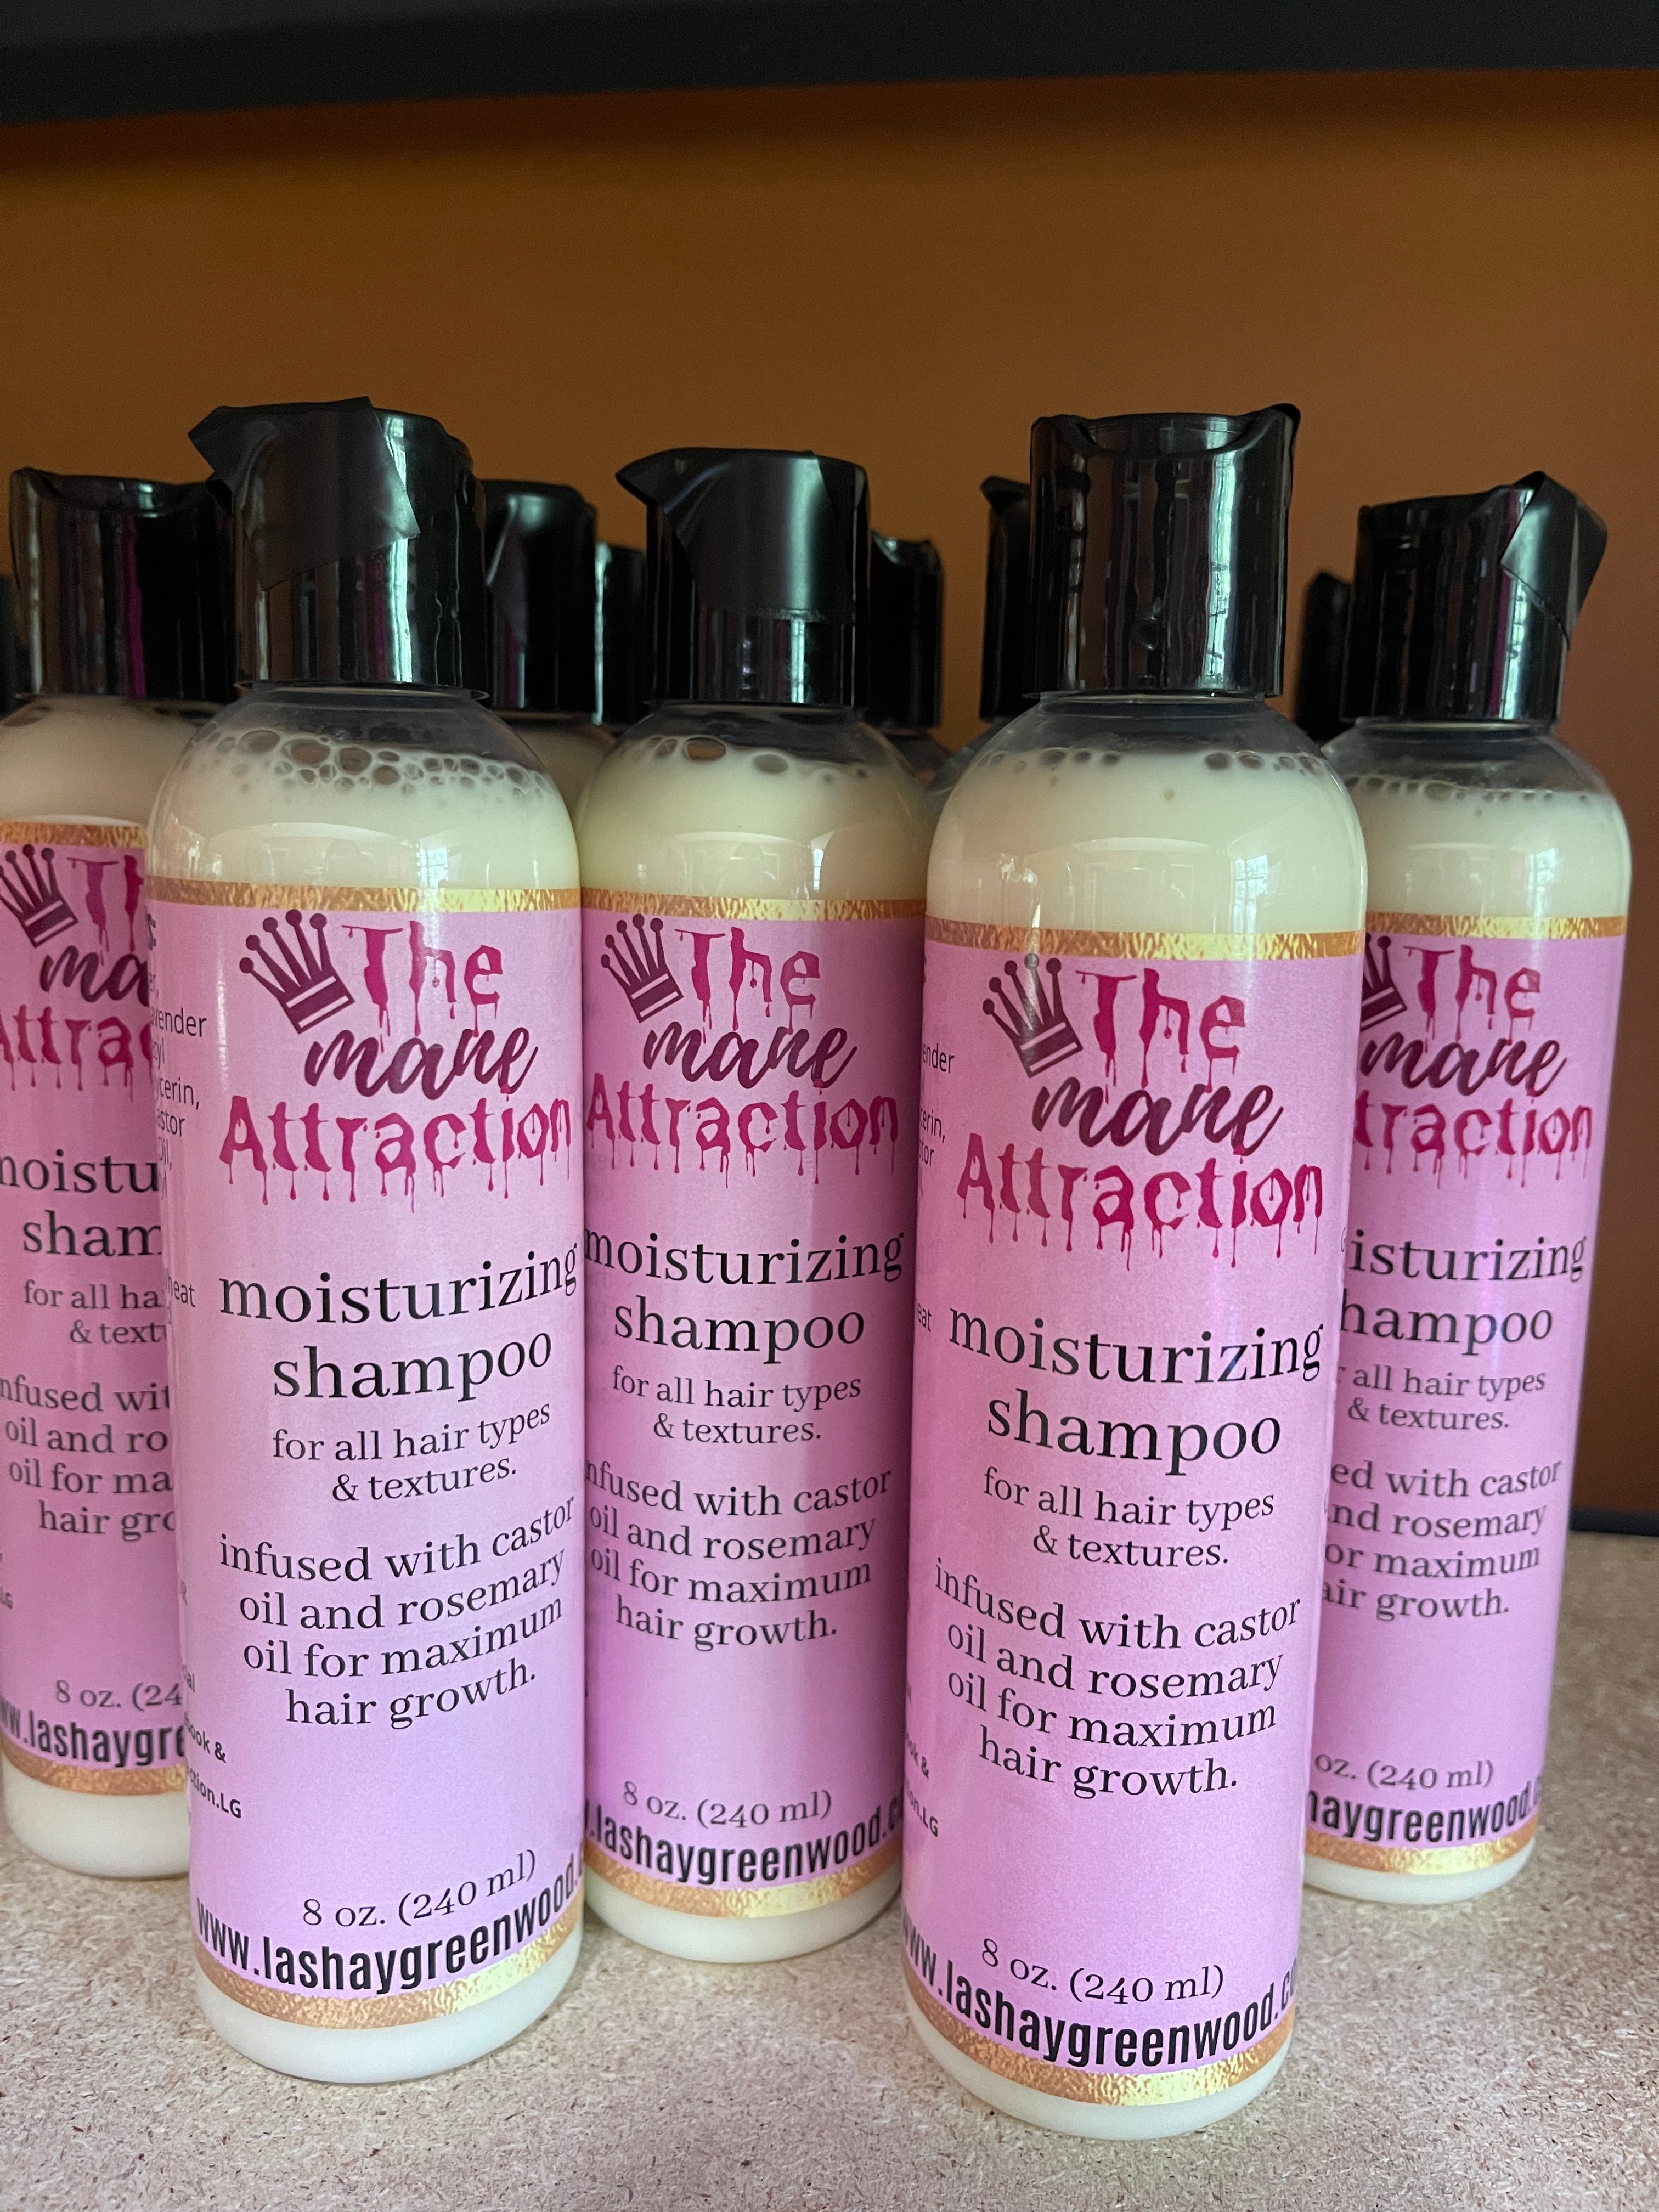 Wholesale Shampoo/Conditioner Duo - The Mane Attraction